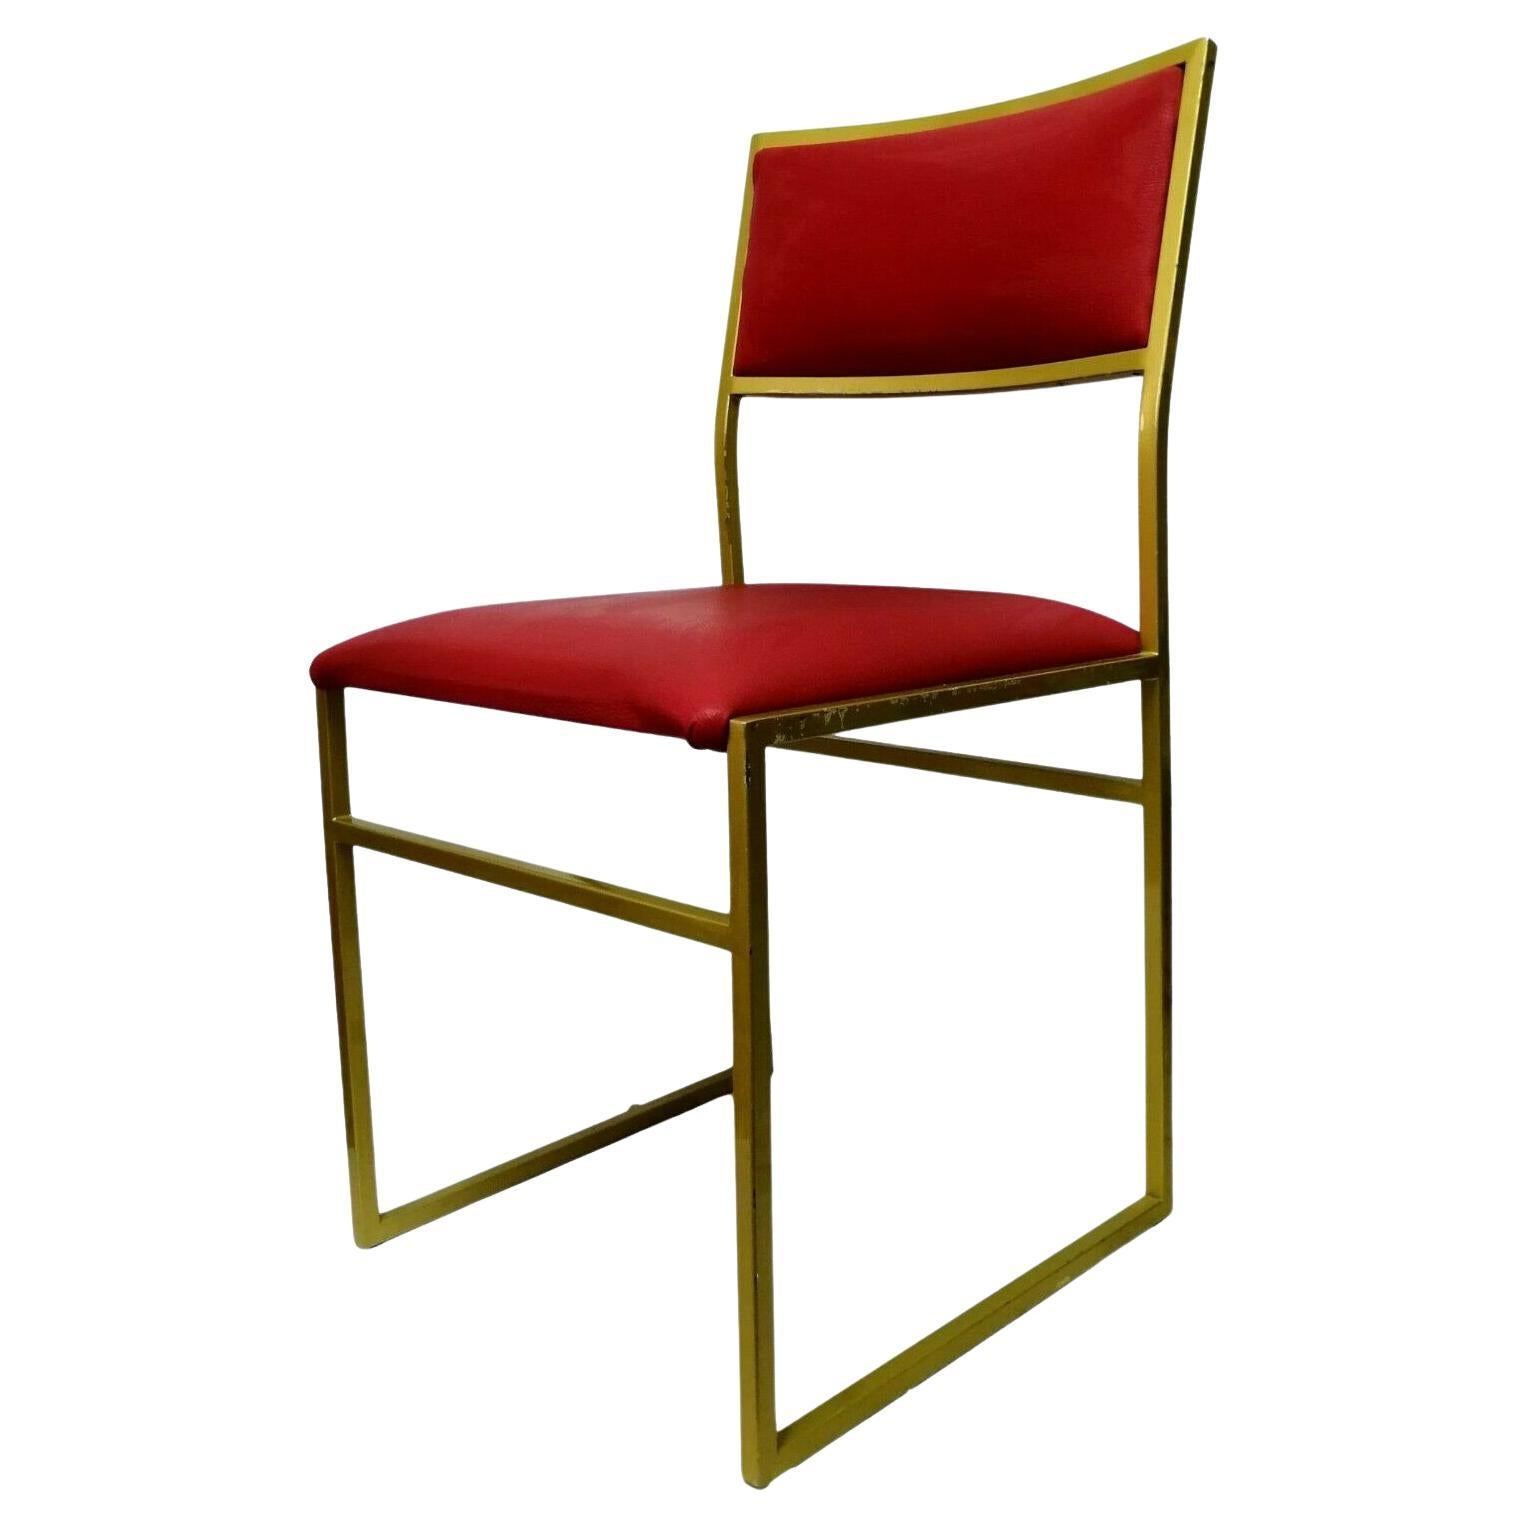 Collectible Chair in Gold Metal and Burgundy Upholstery, 1970s For Sale